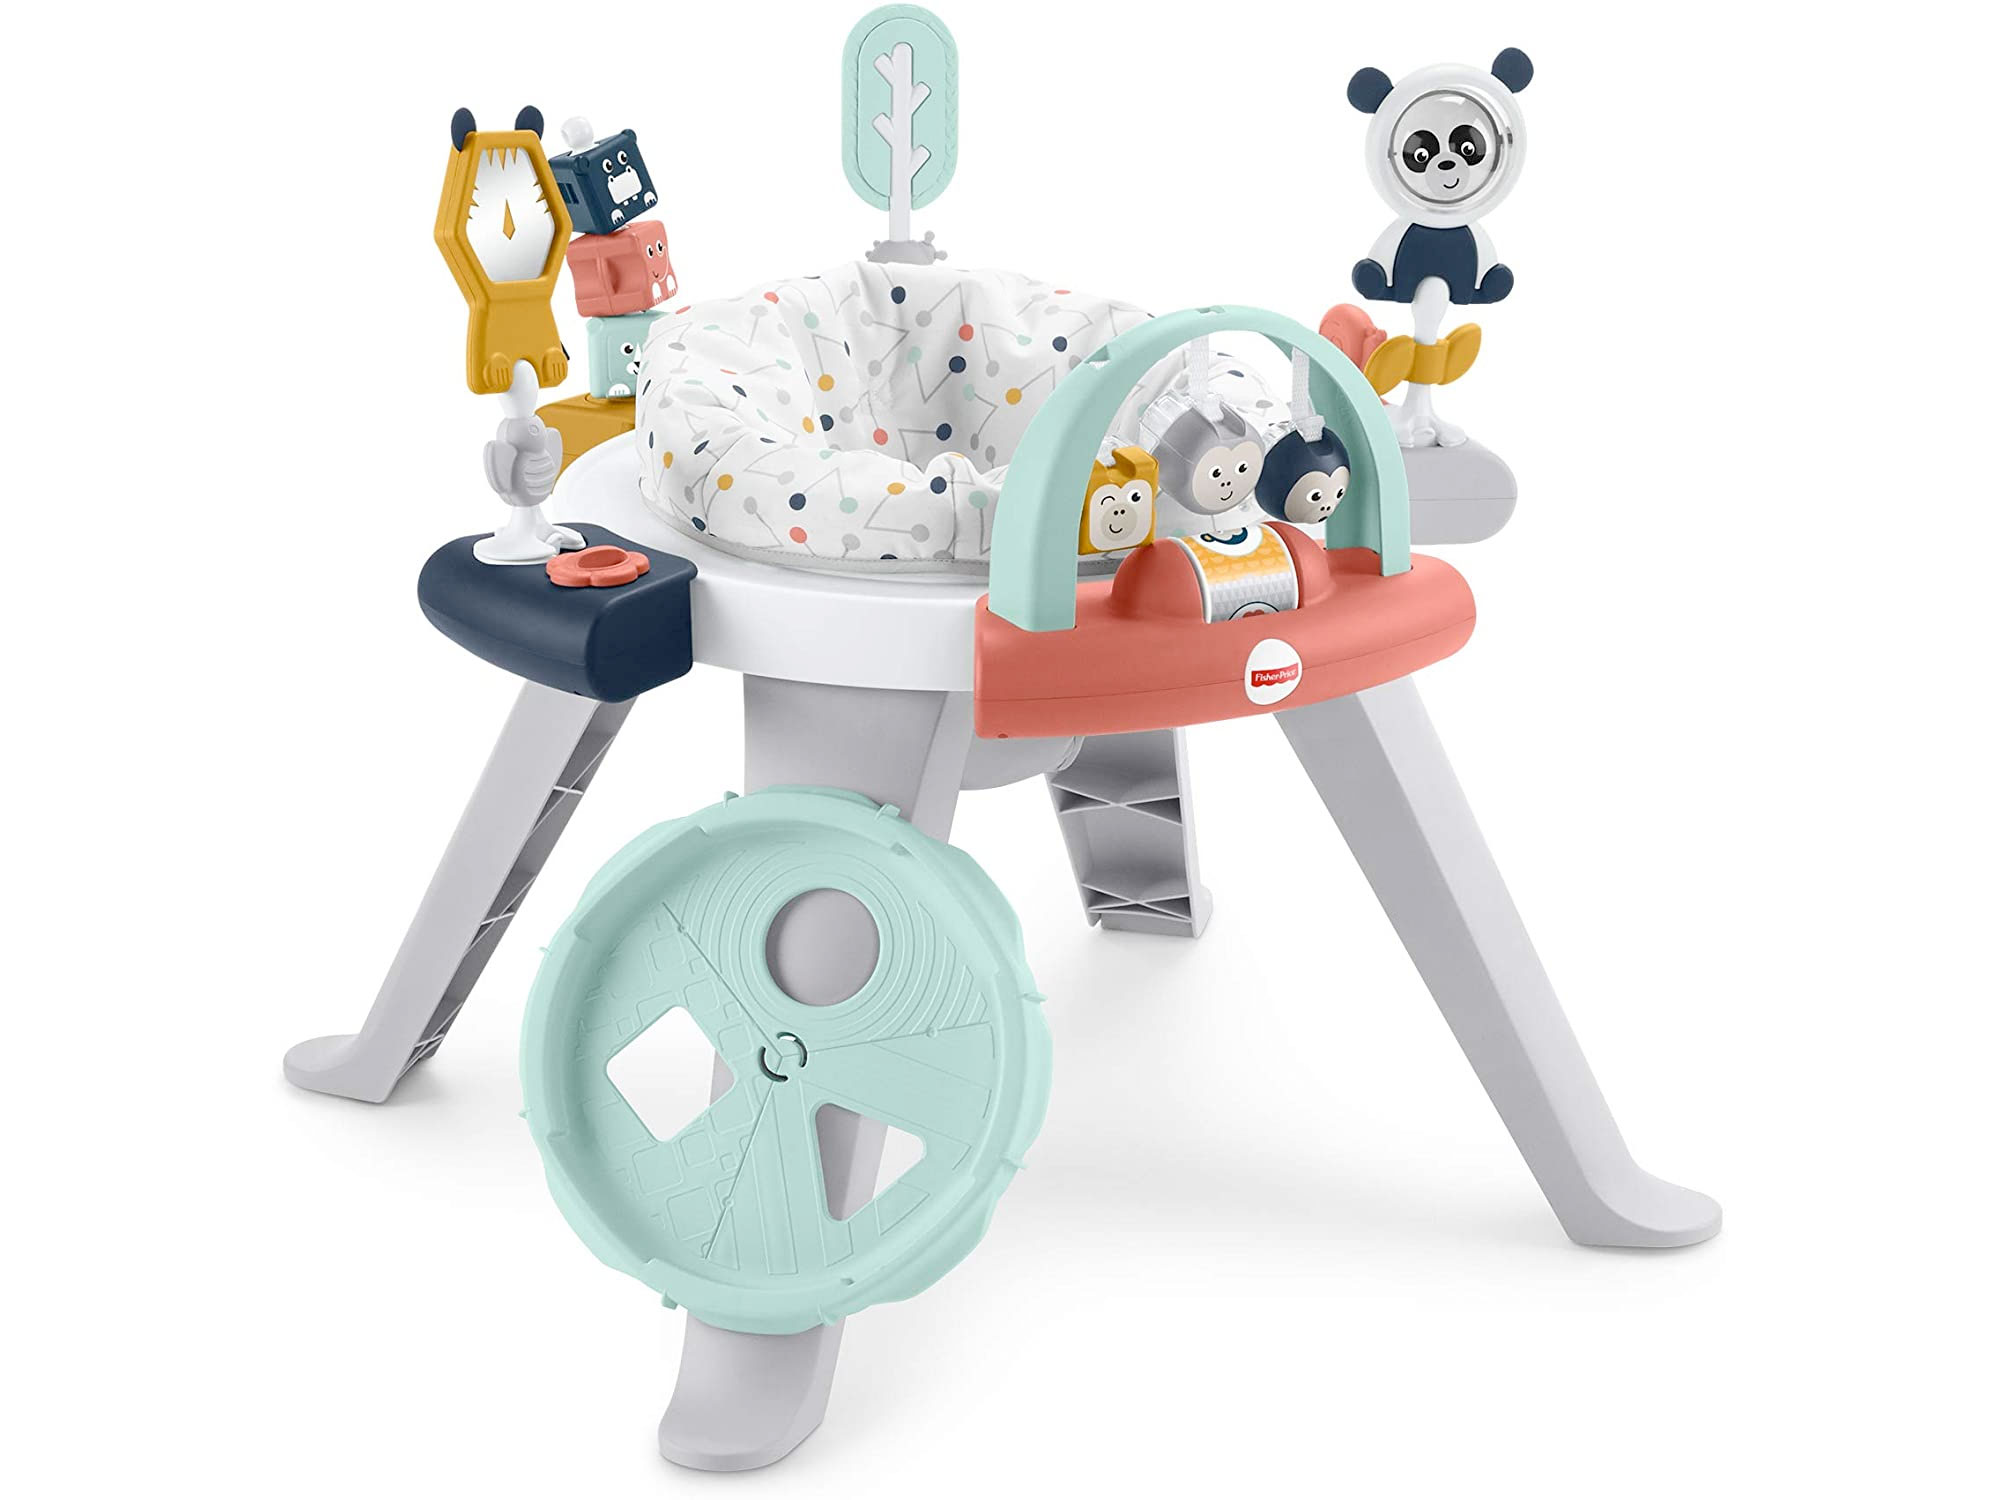 Amazon：Fisher-Price 3-In-1 Spin & Sort Activity Center只卖$56.17